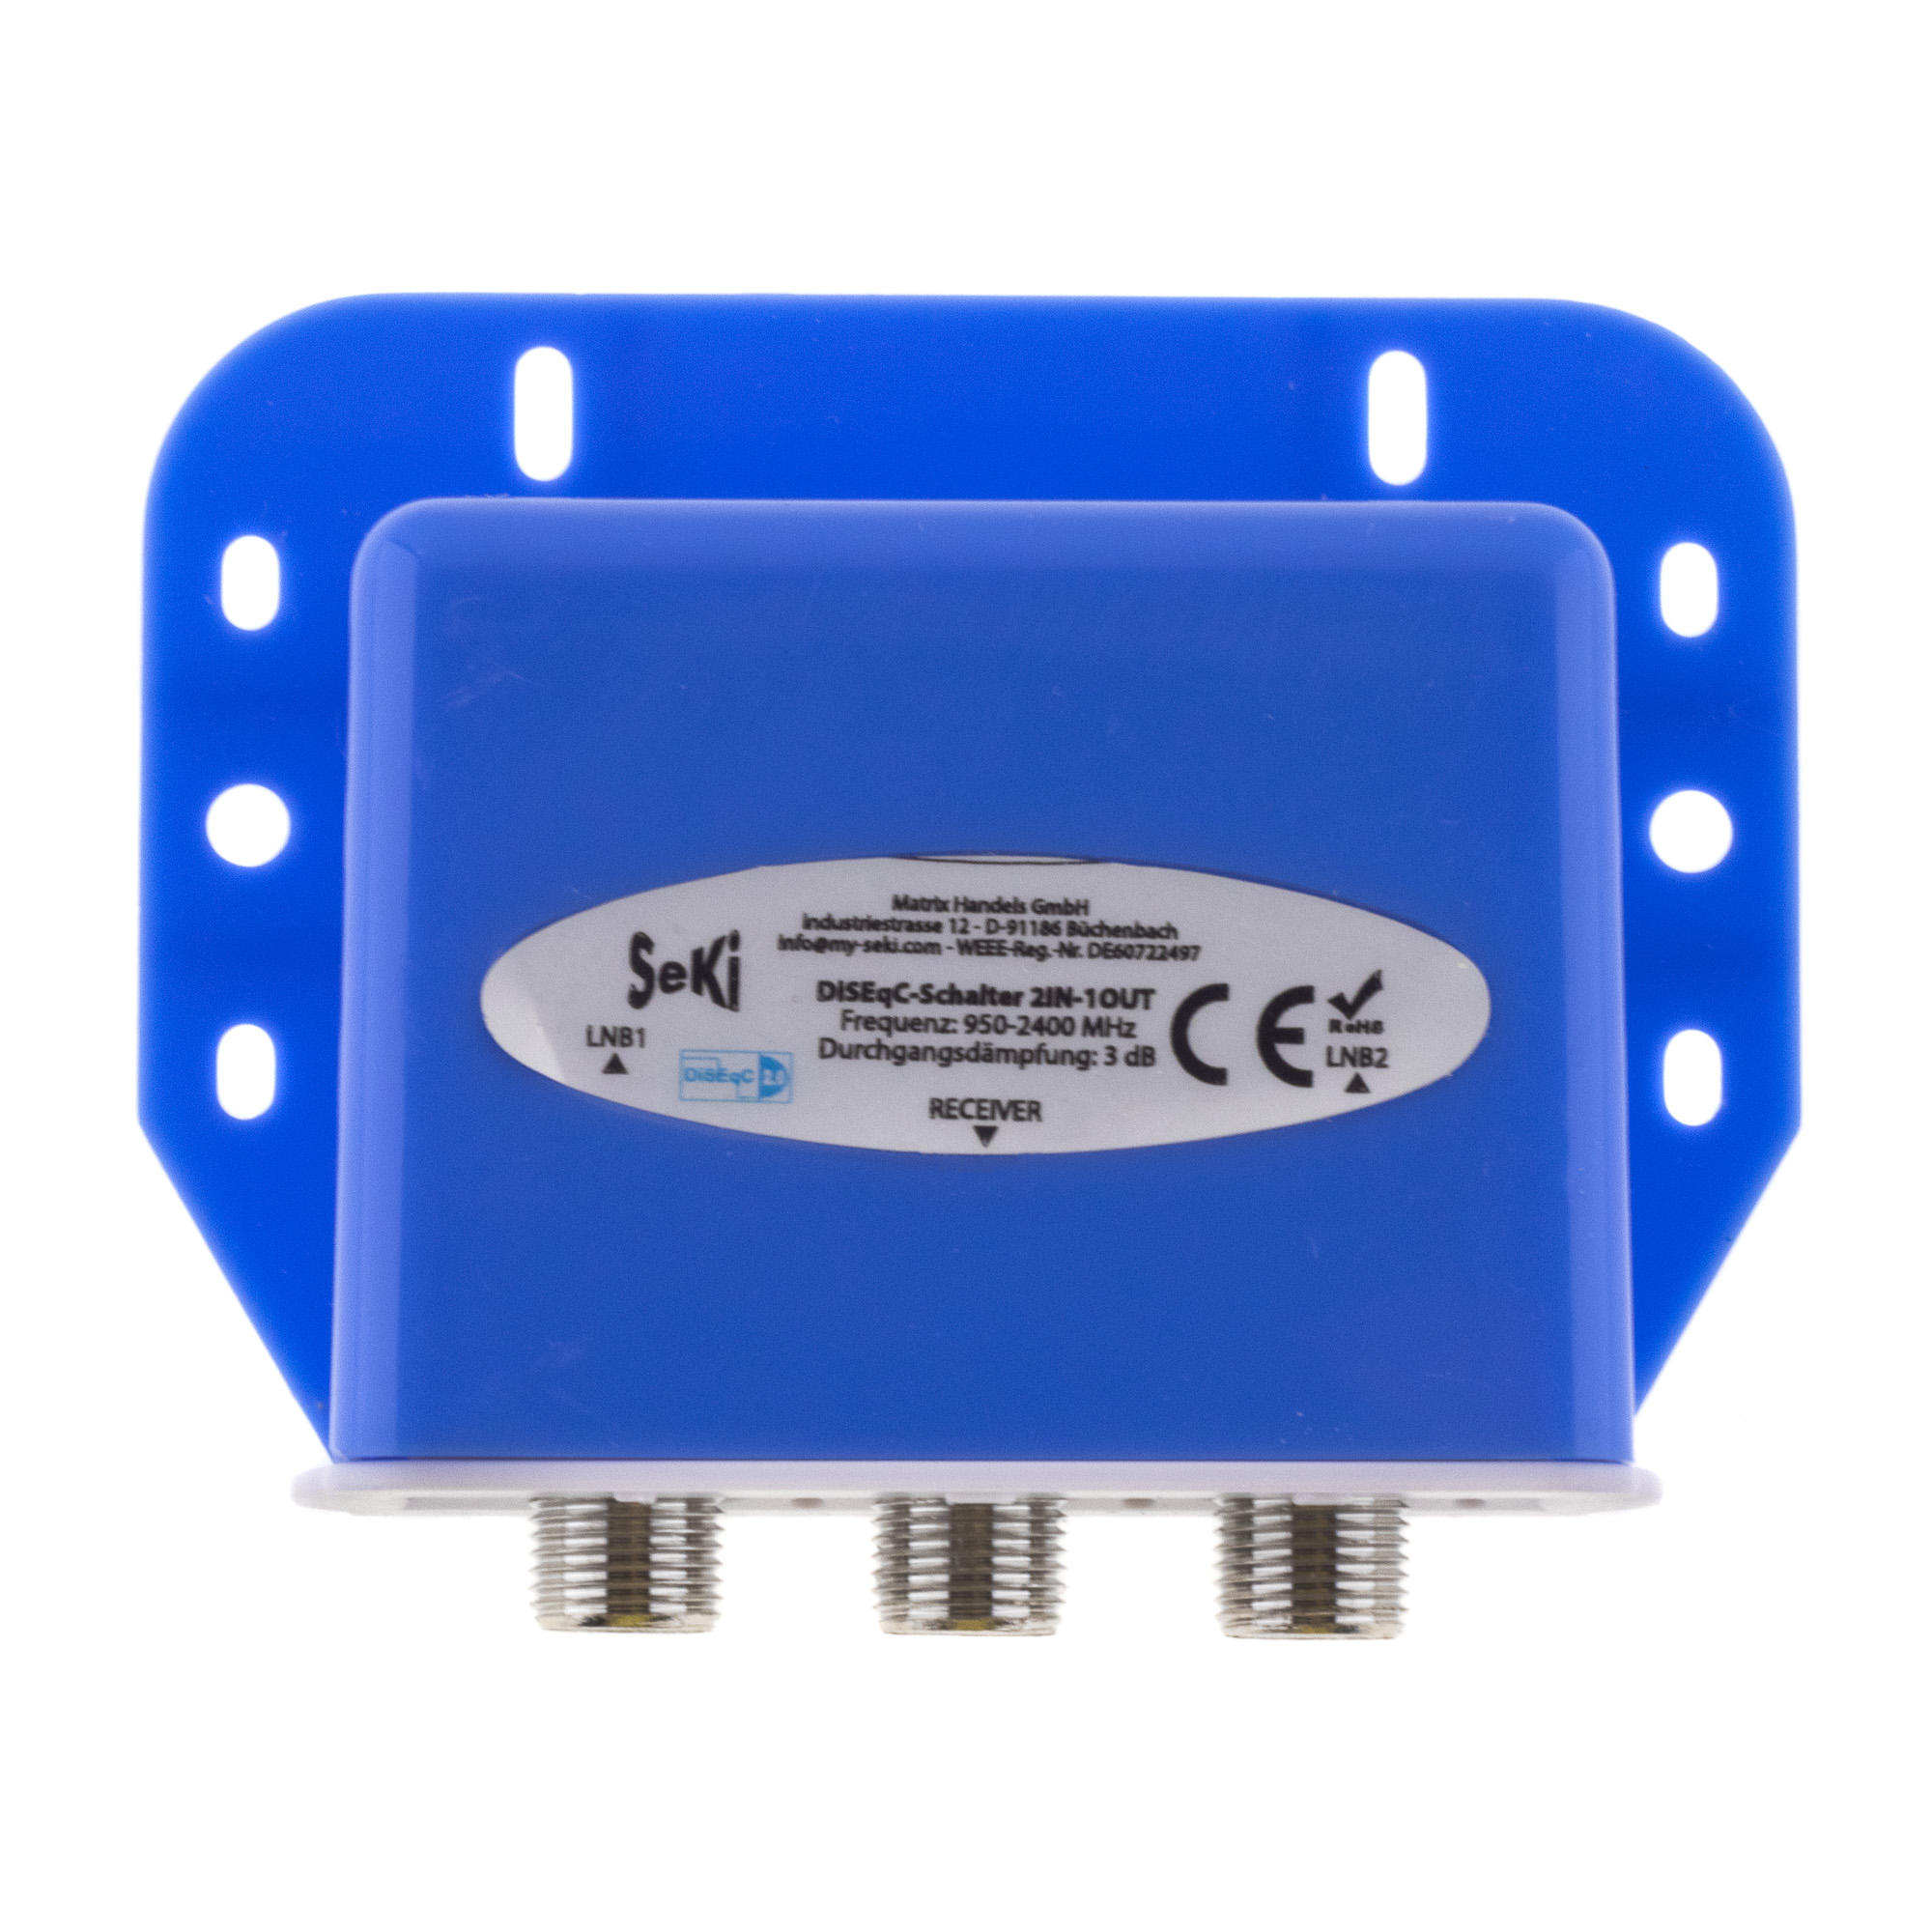 DiSEqC-switch 2IN-1OUT incl. weather proctection